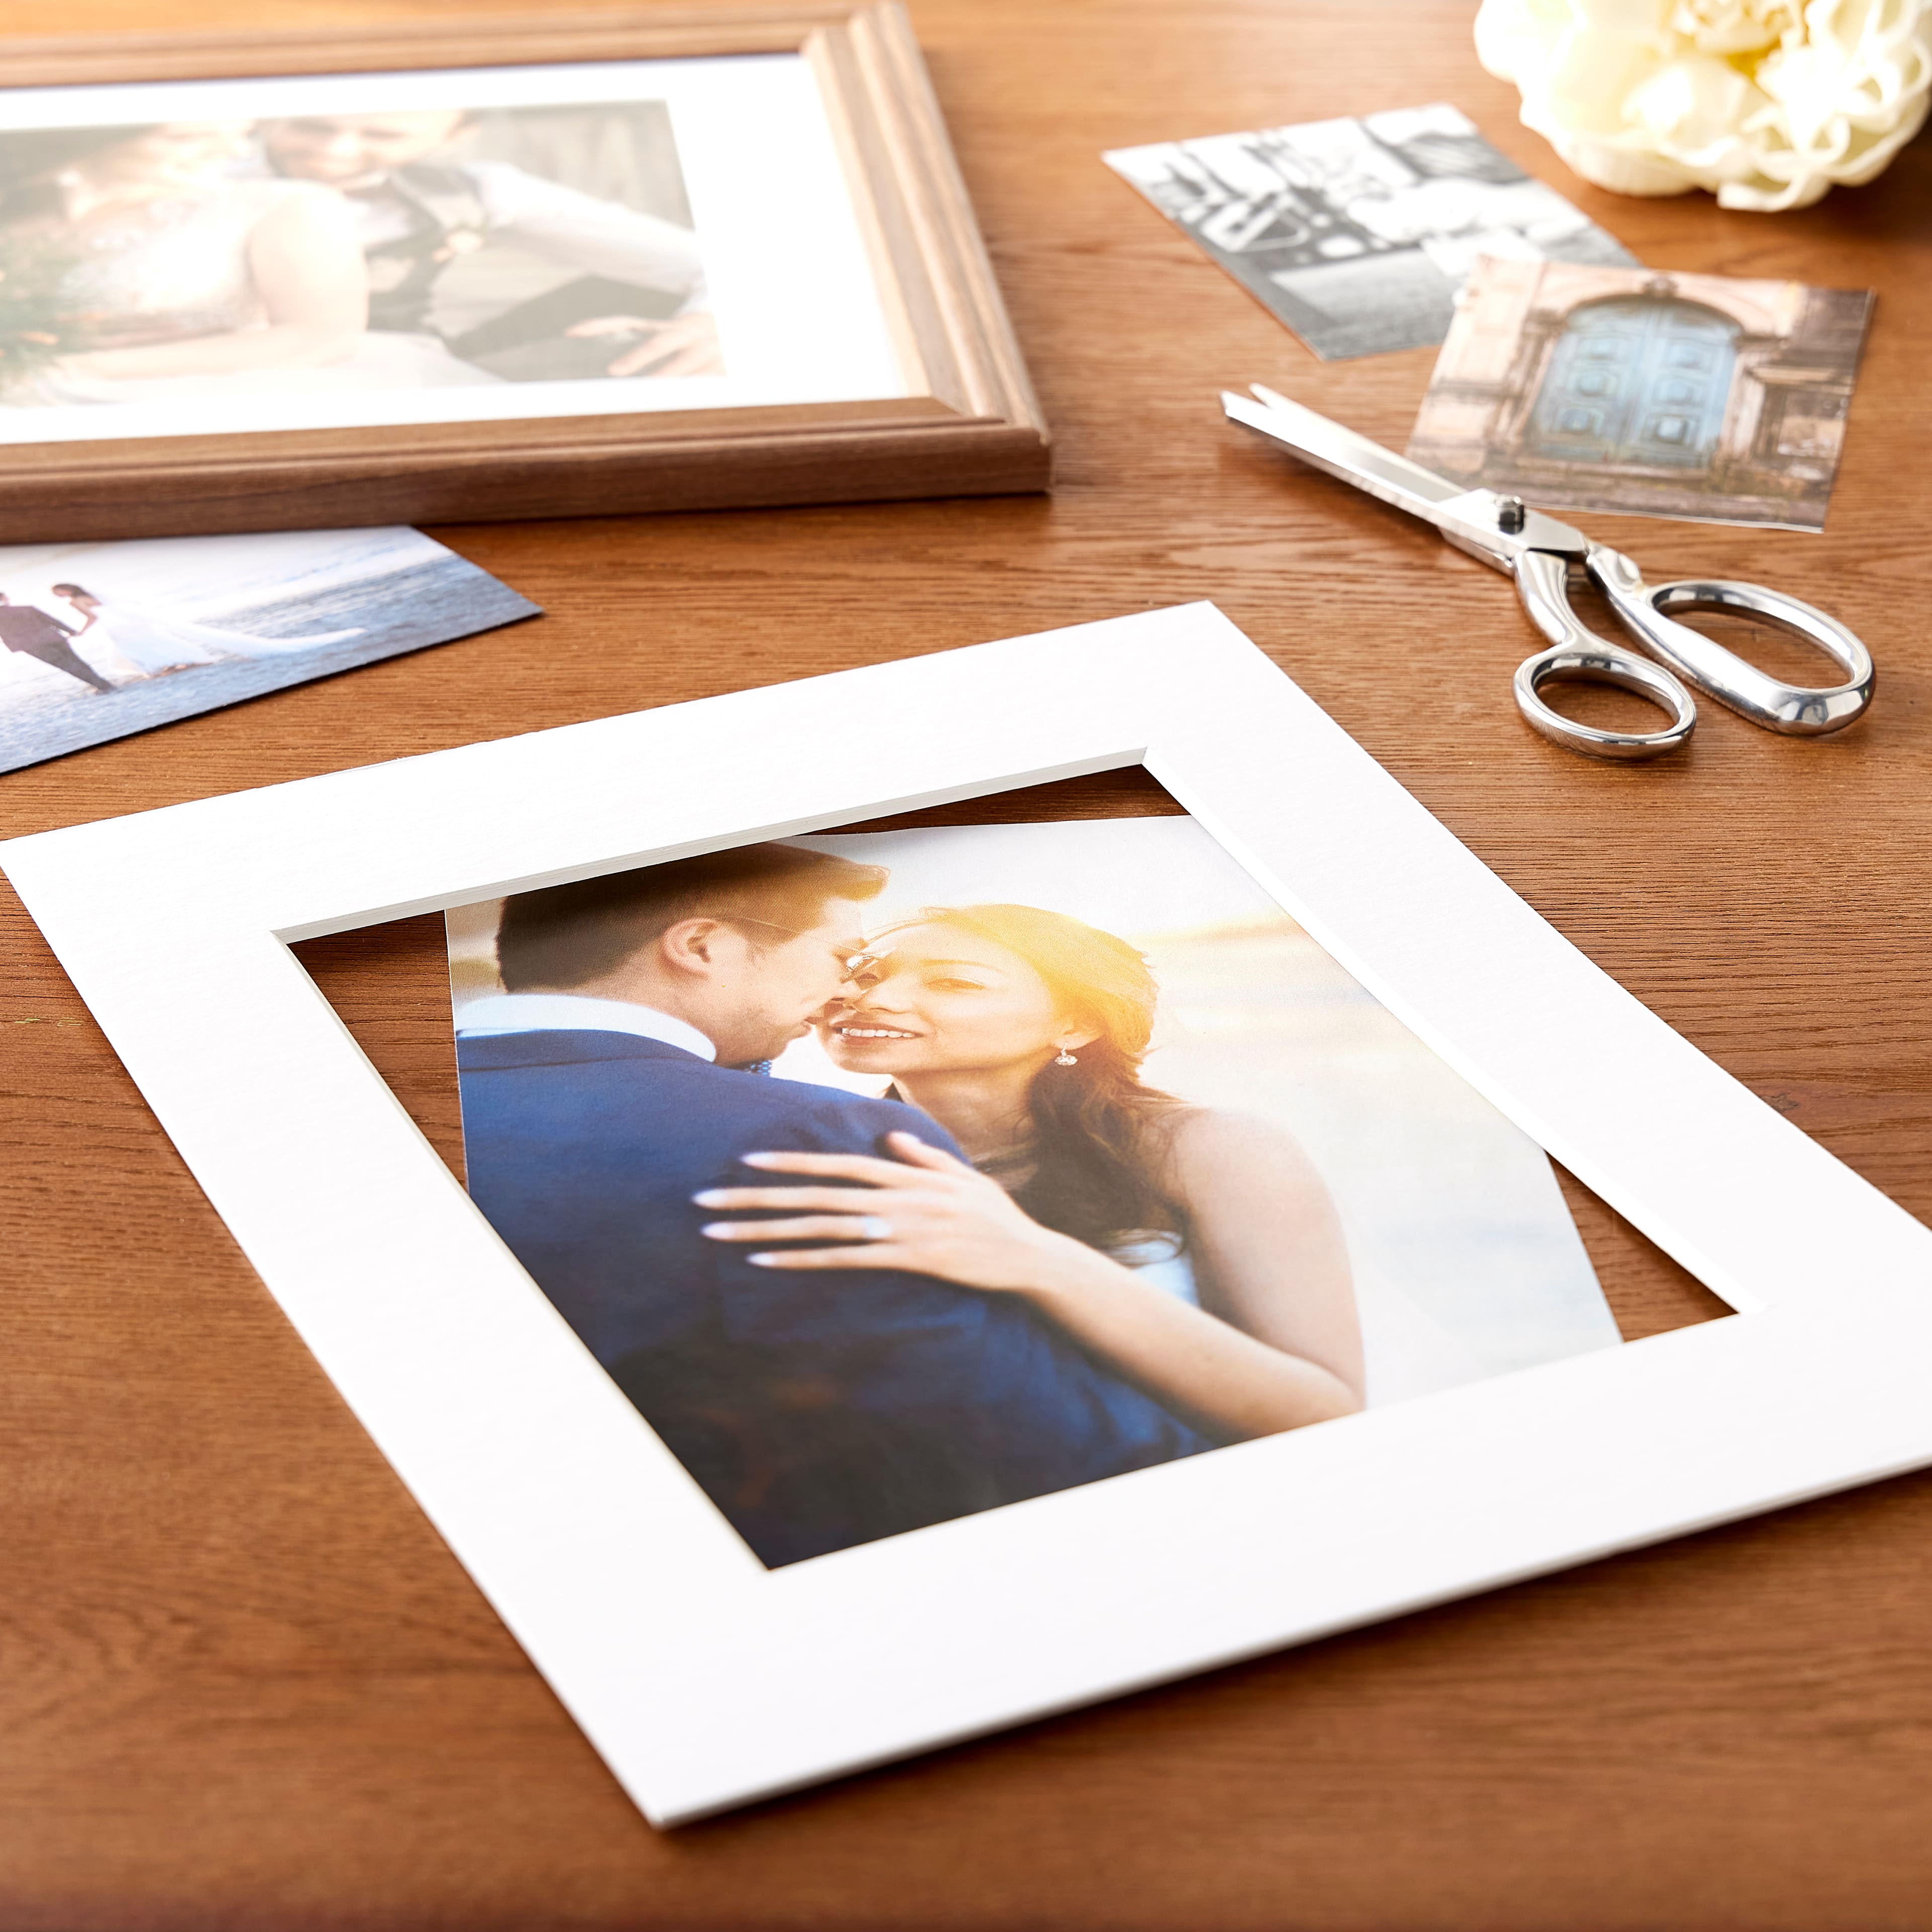 11x14 frame matted 8x10 open 11x14 picture frame — Modern Memory